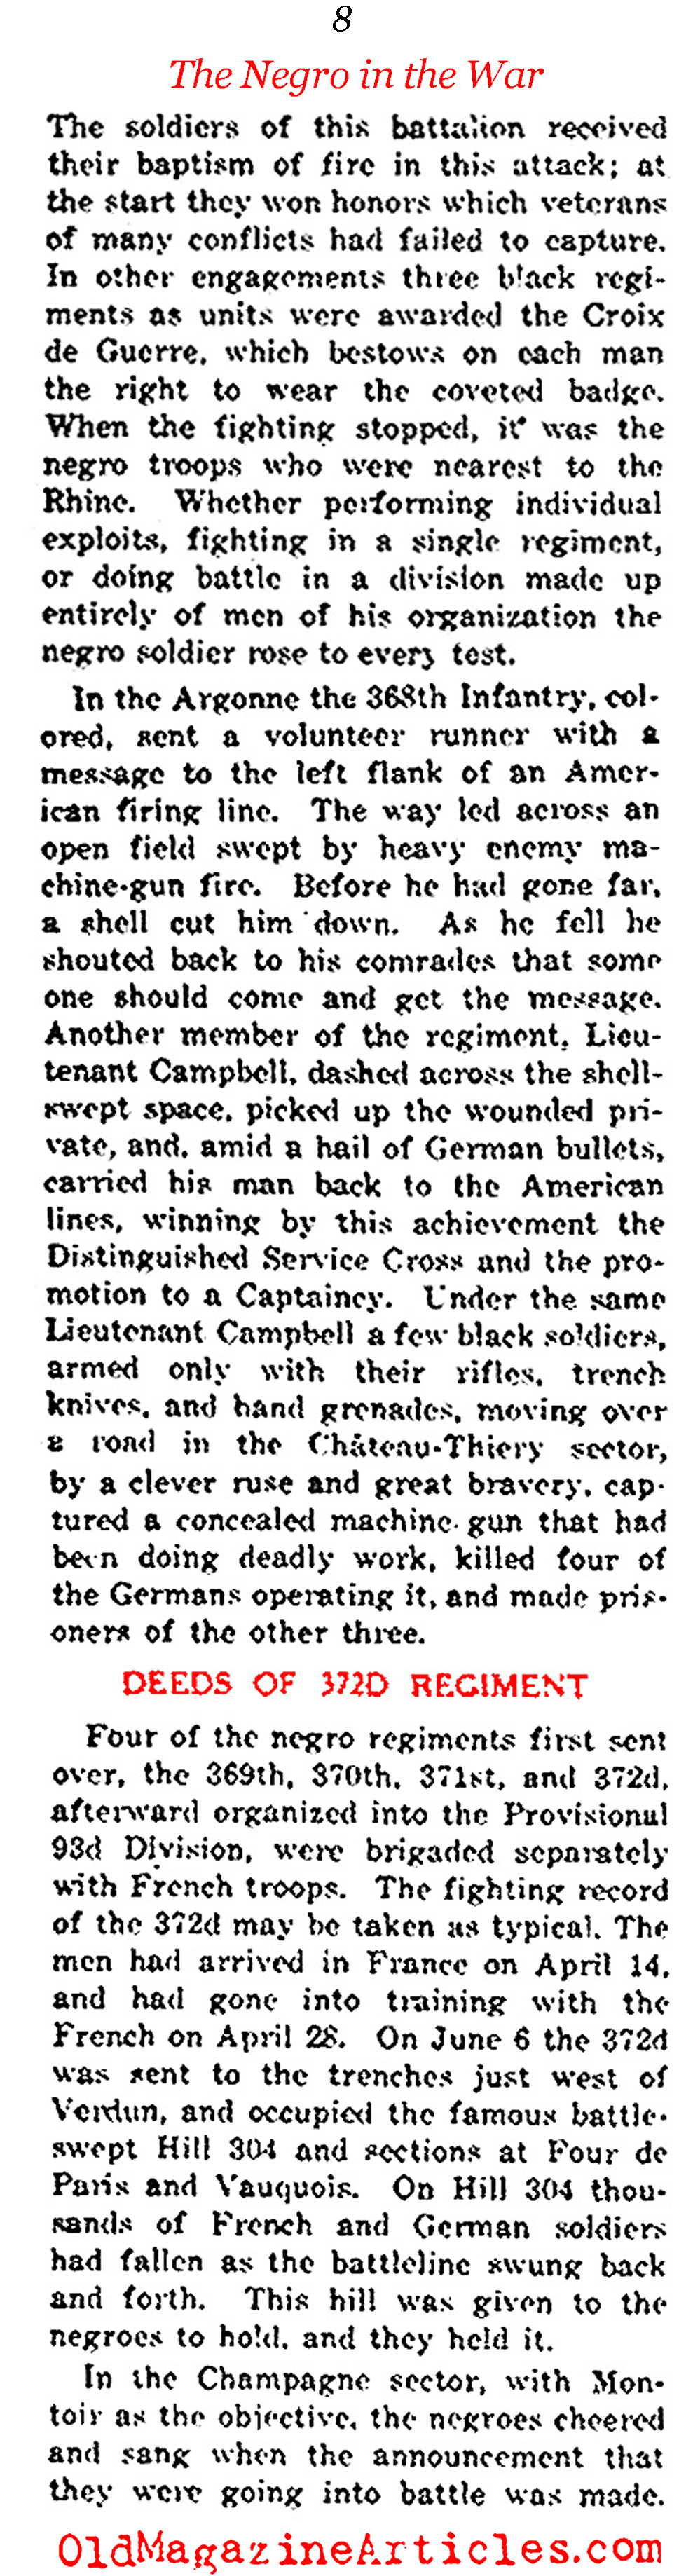 'The Negro in the War' (NY  Times, 1919)